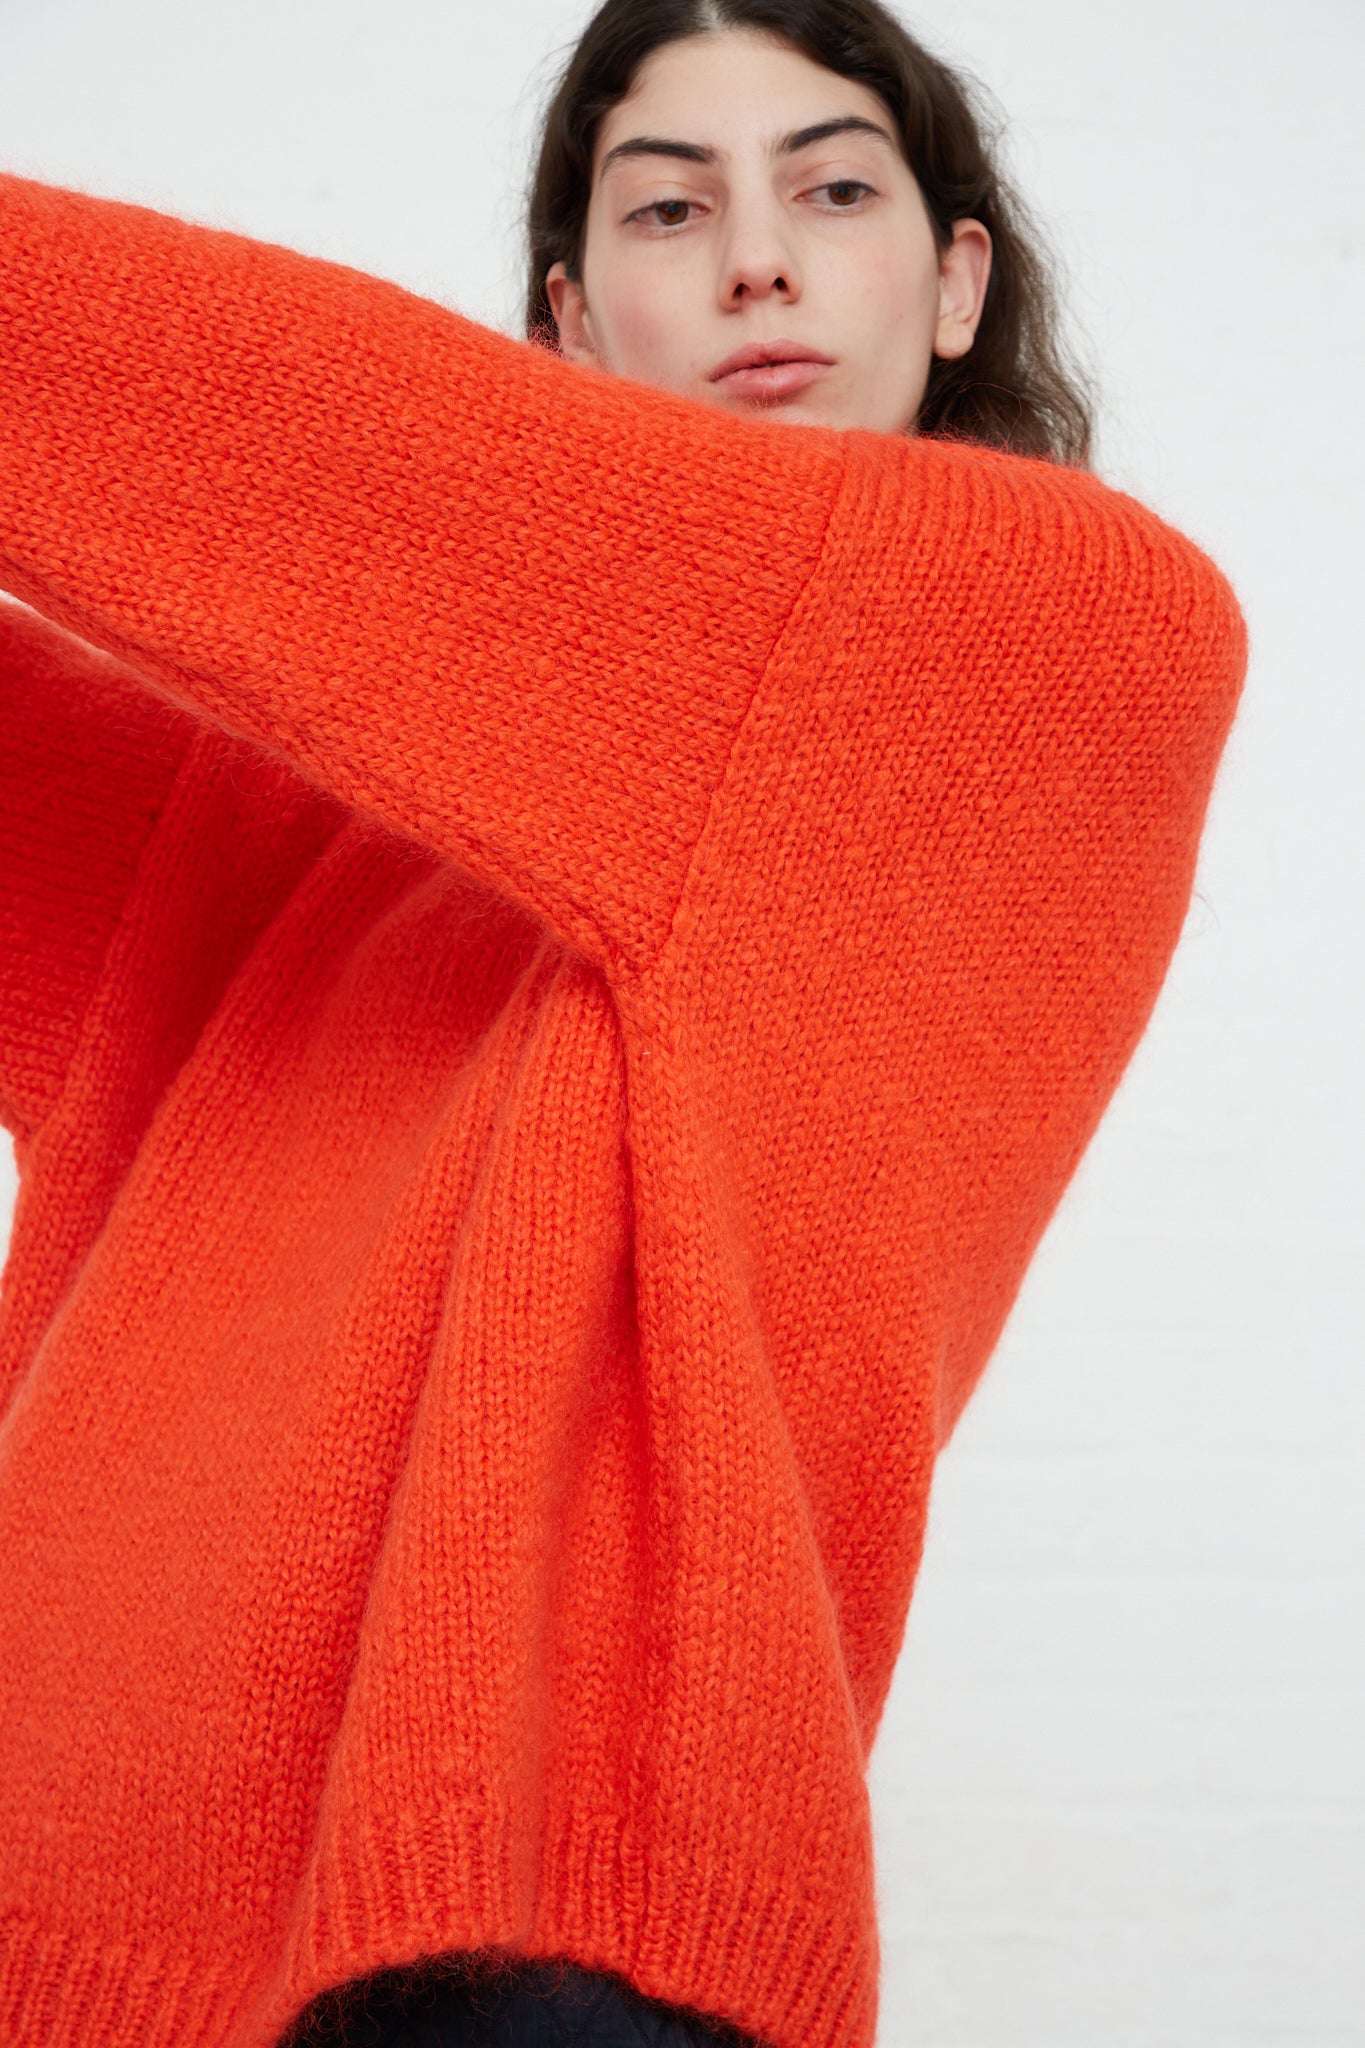 A woman in an oversized Cordera Mohair Sweater in Tangerine, made from a mohair blend, is posing in front of a white wall.